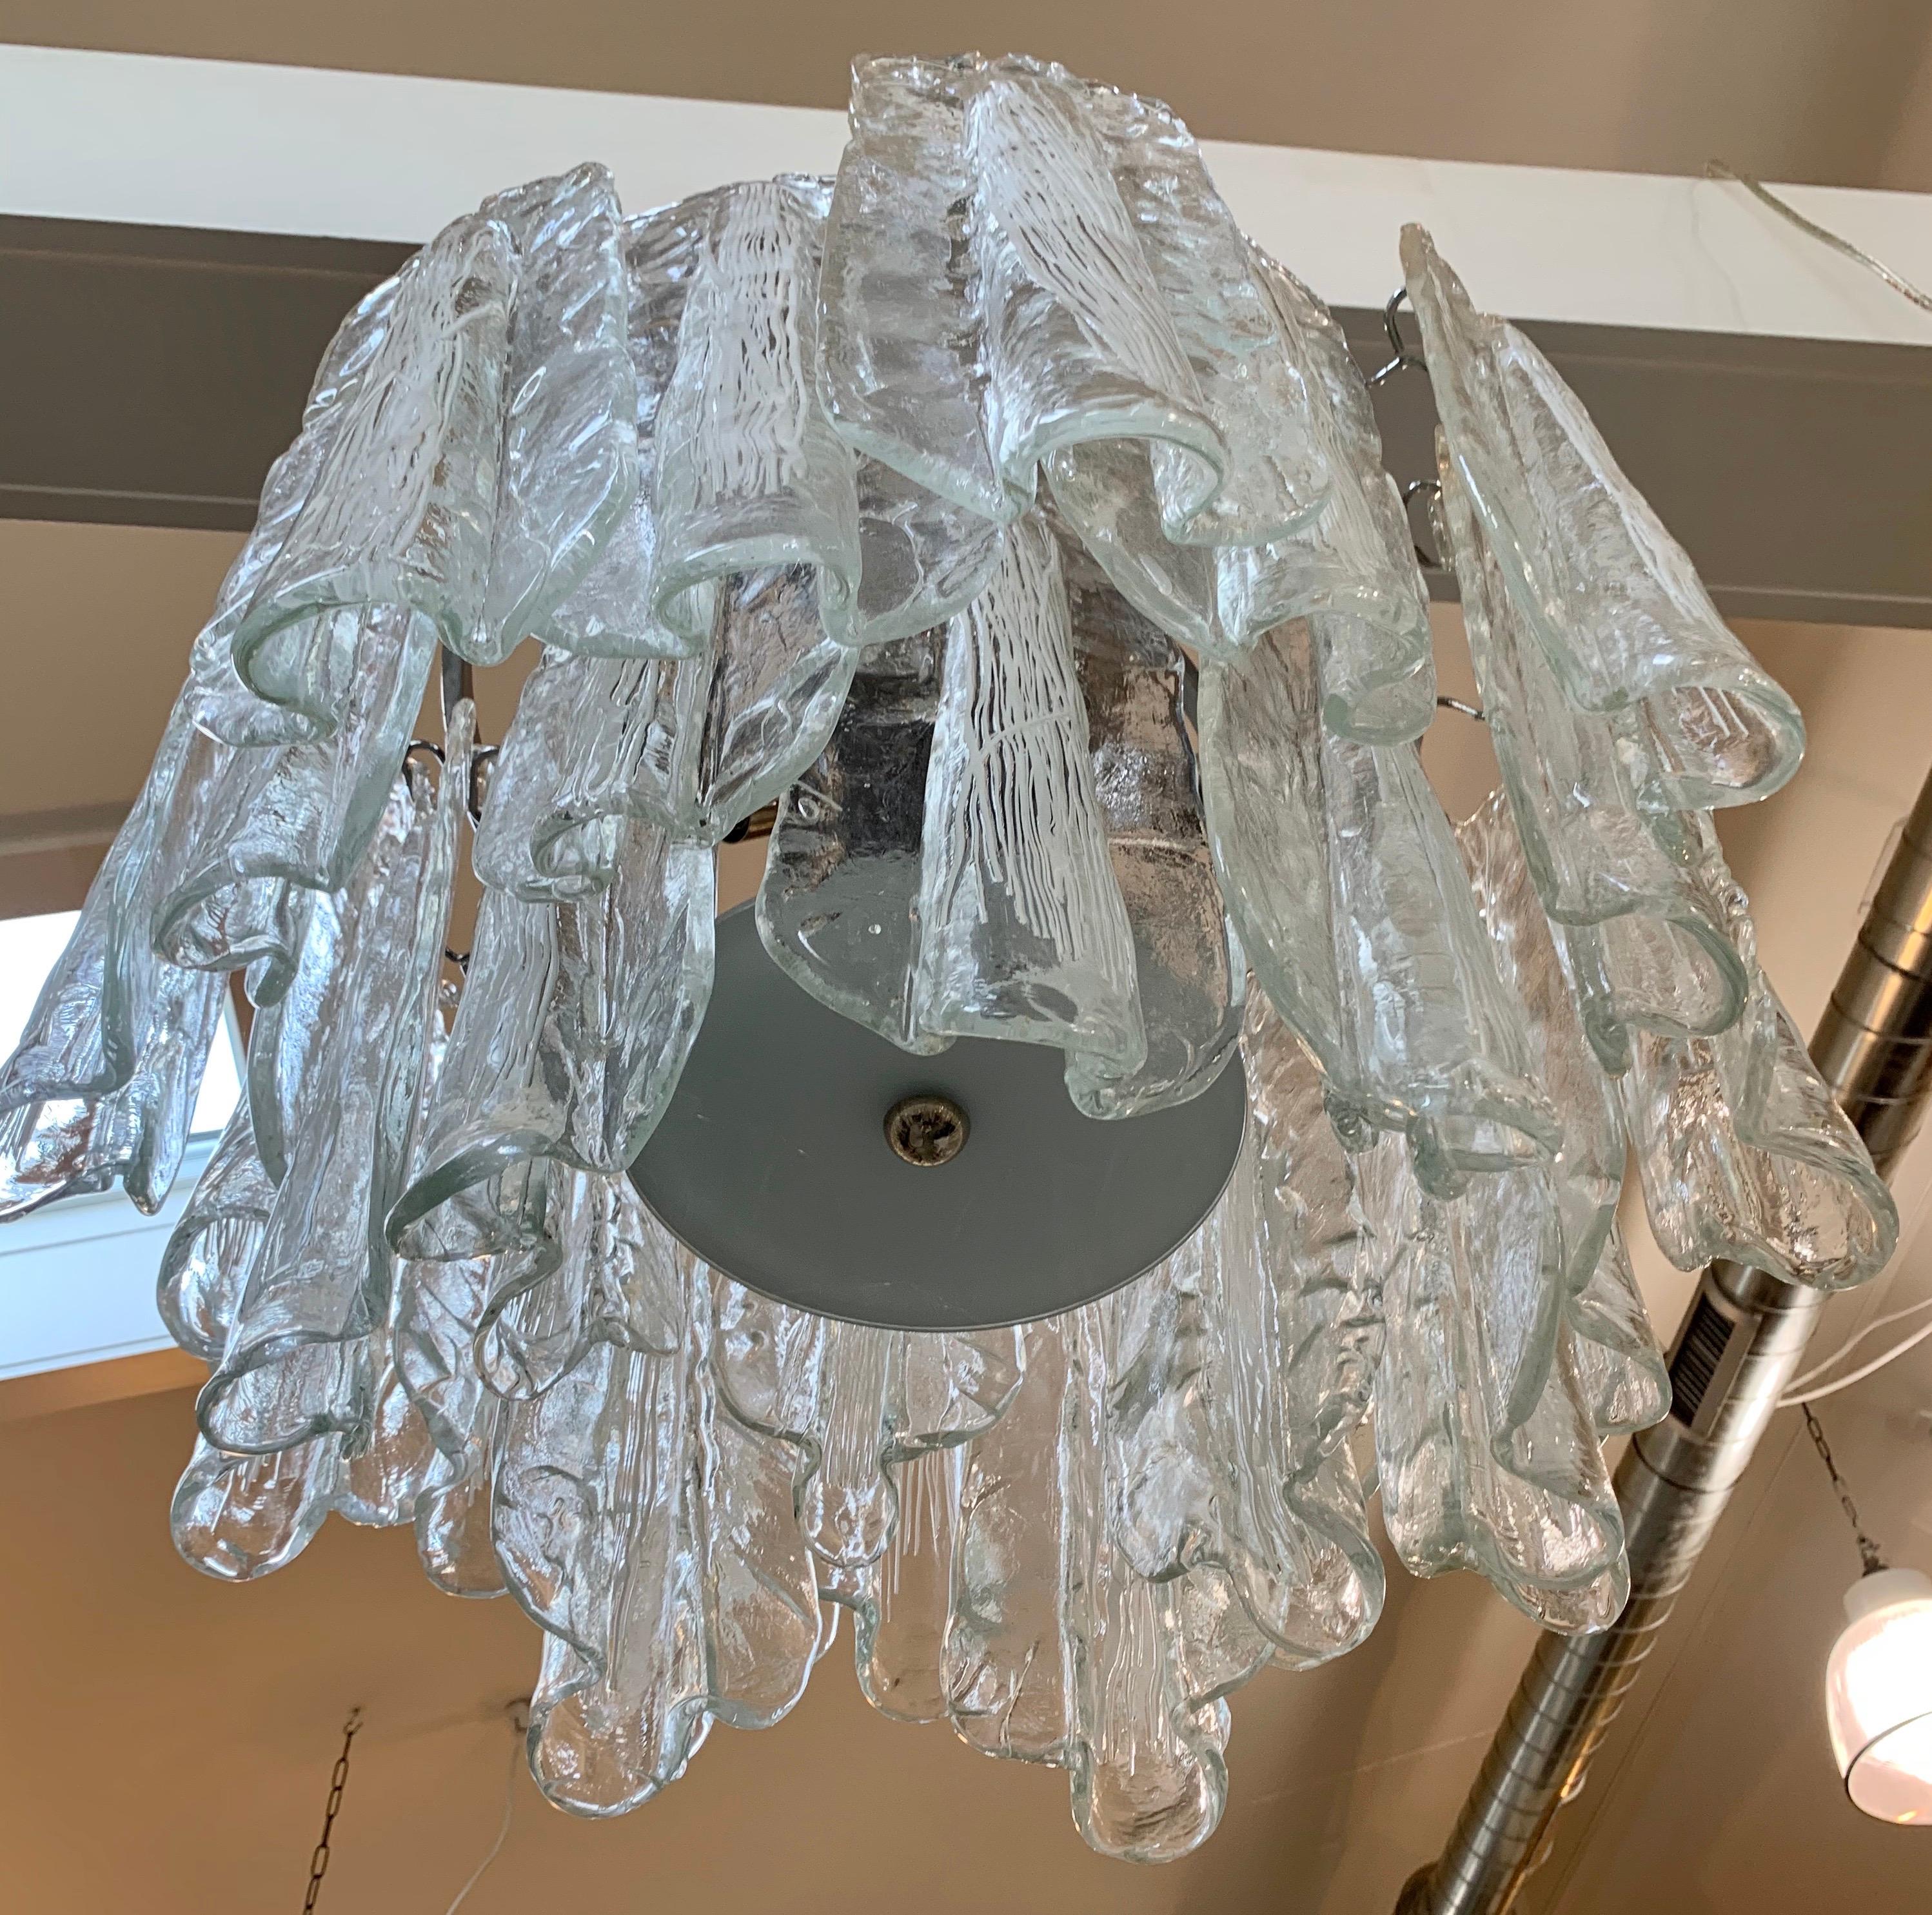 Iconic Italian Murano glass hanging slab chandelier. Great scale and style. Now, more than ever, home is where the heart is, circa 1970s. Wired for USA and in perfect working order.